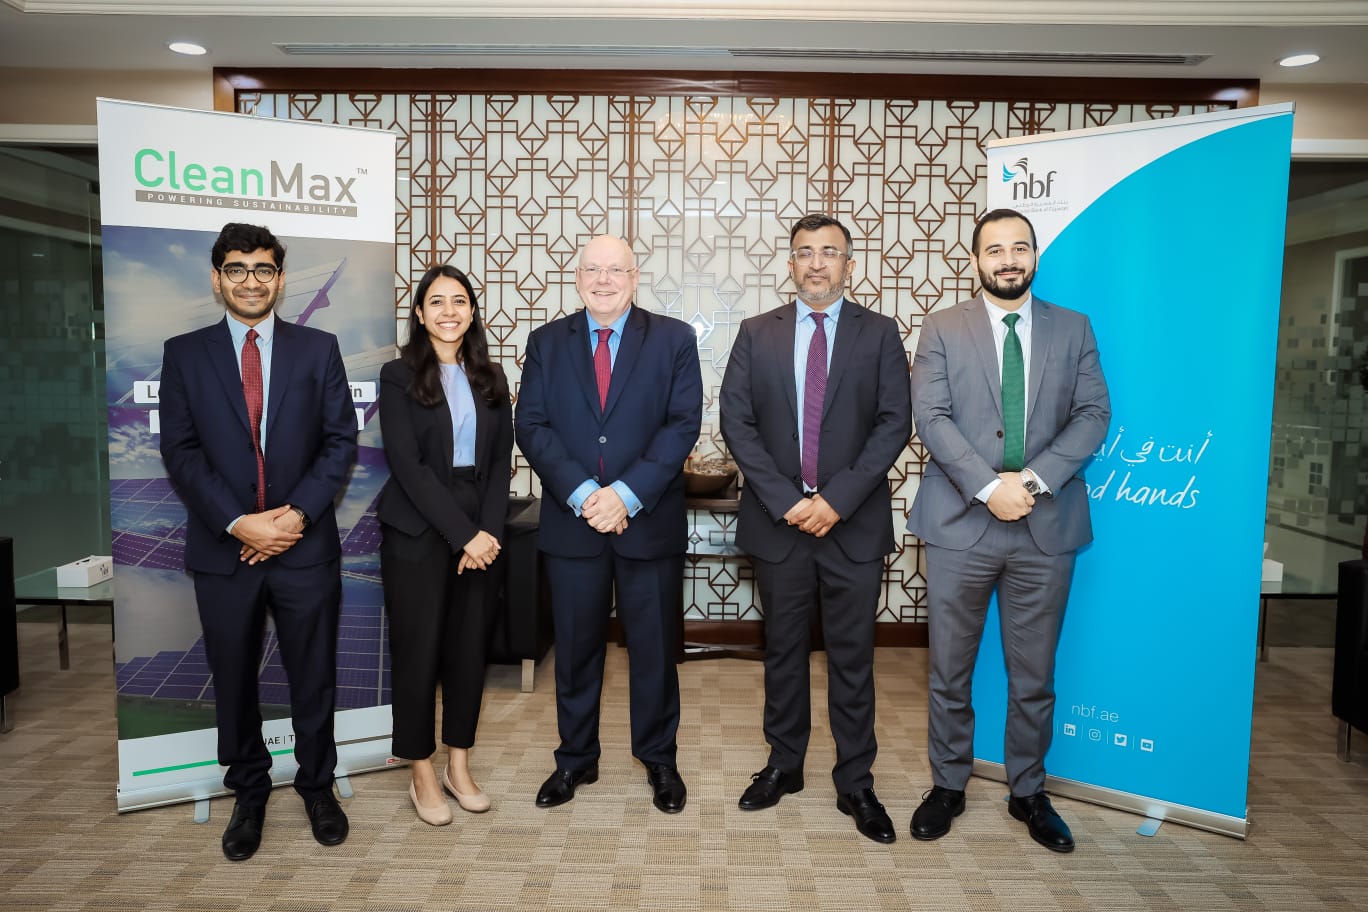 National Bank of Fujairah announces long-term partnership with CleanMax to finance its rooftop solar projects in UAE